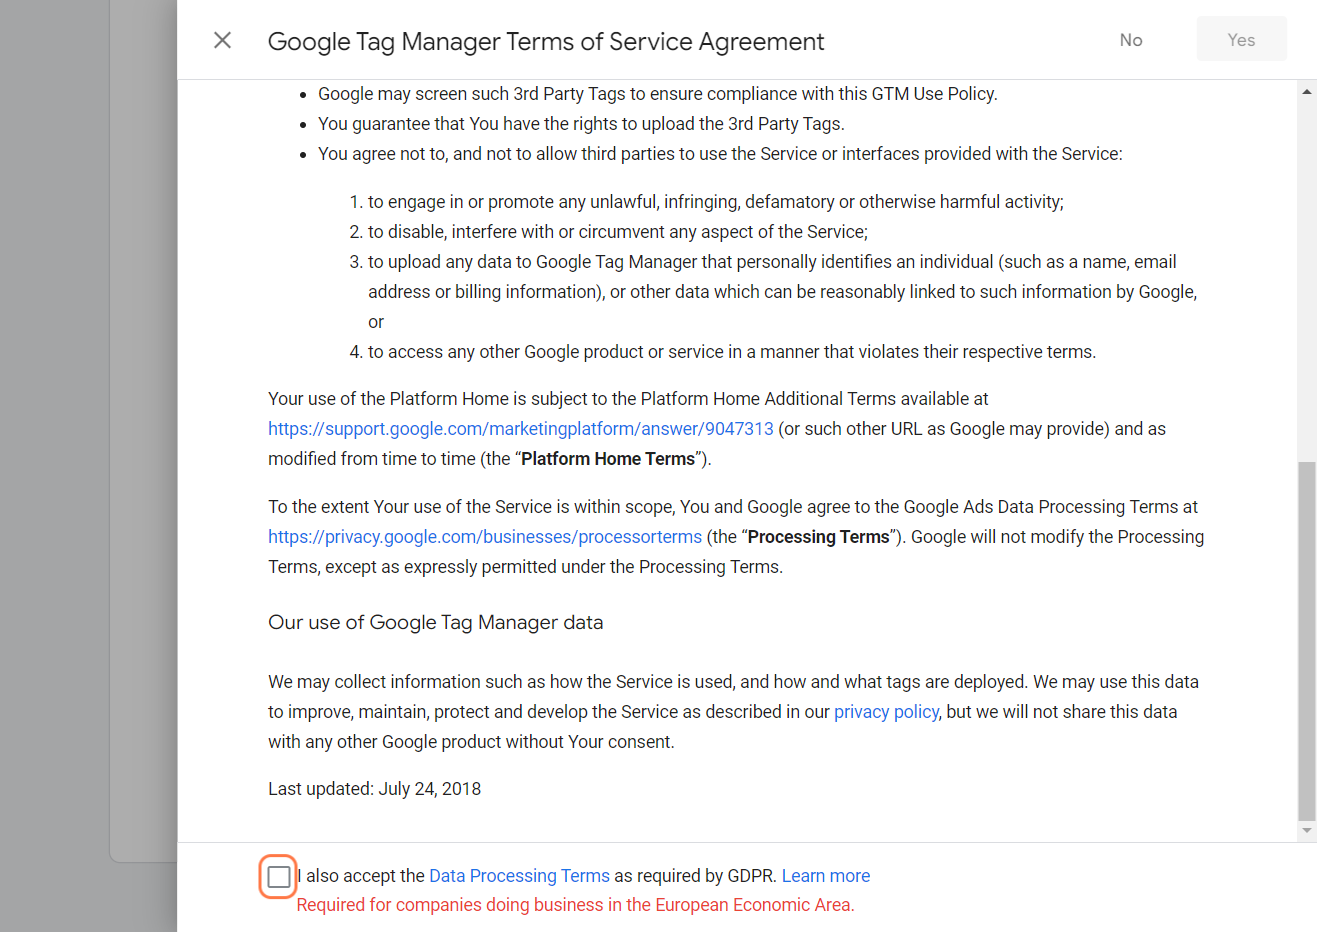 GTM terms of service agreement